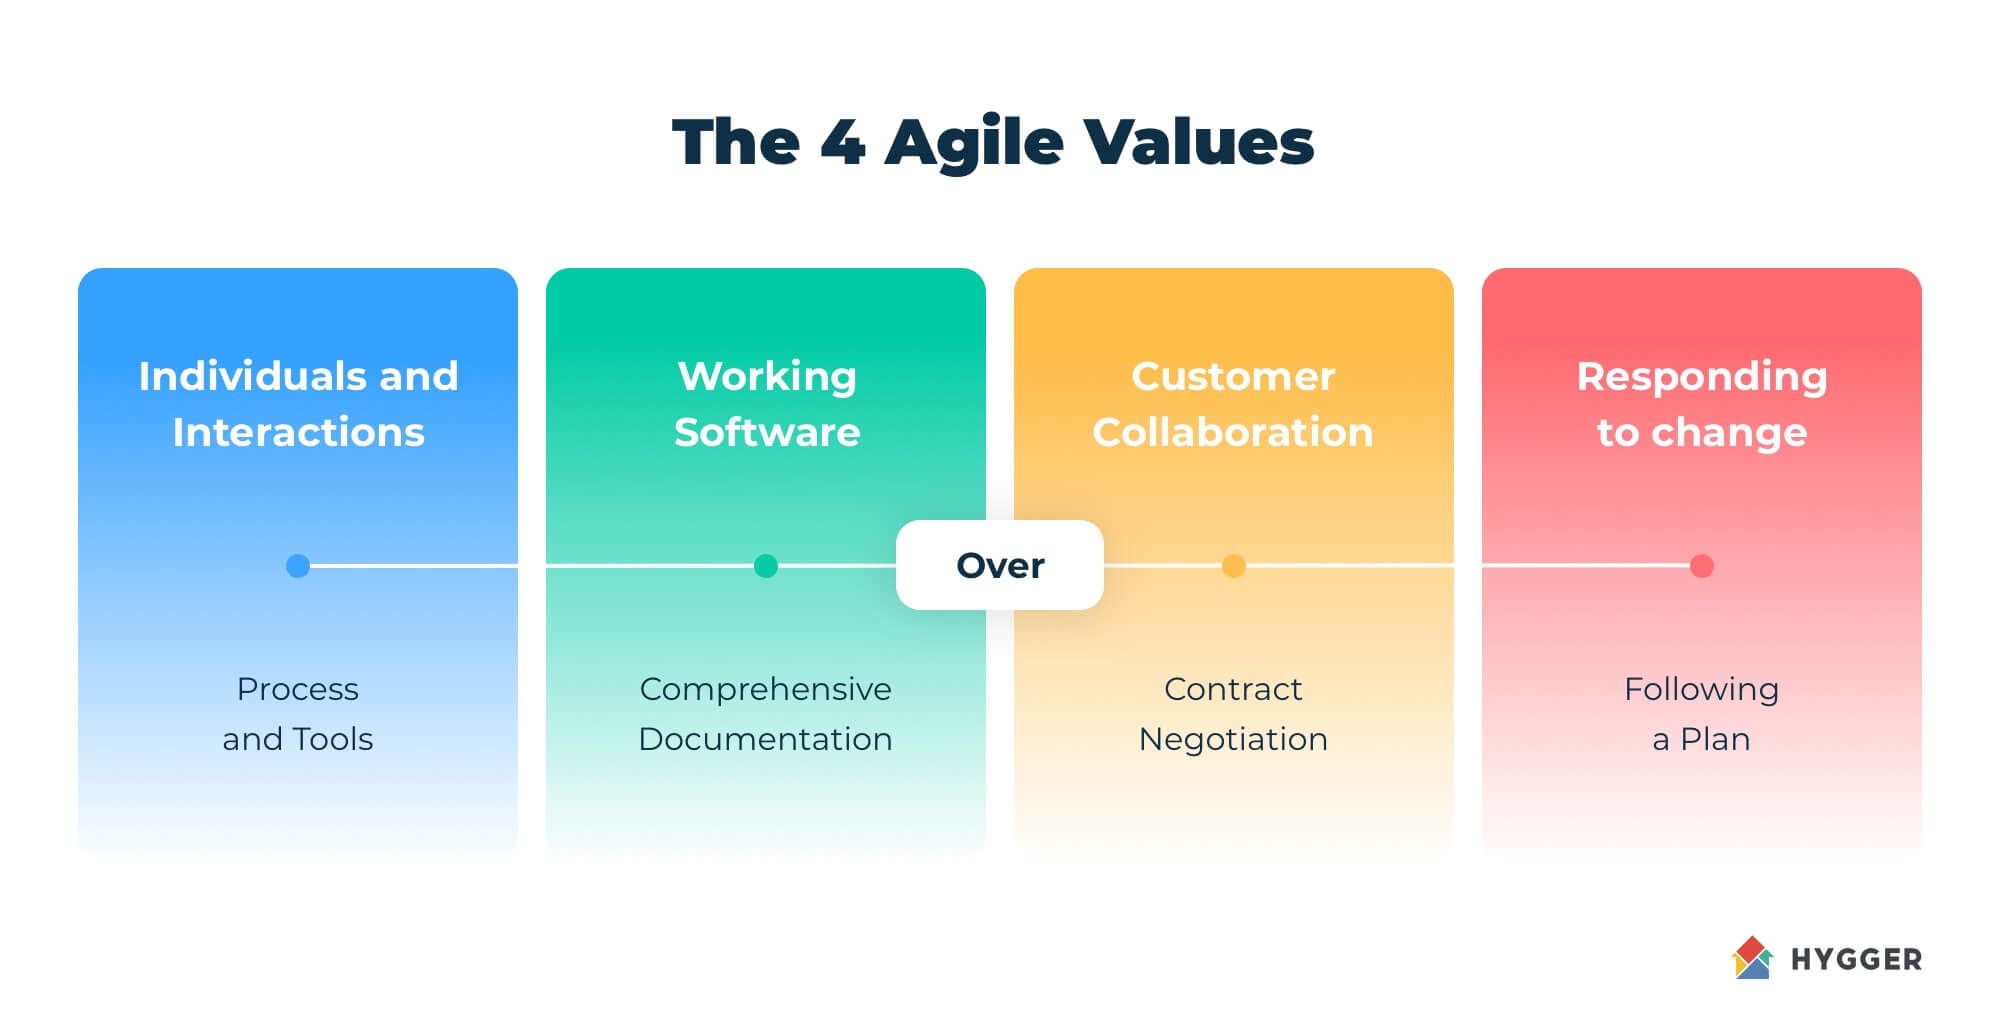 Agile project management is considered more innovative and productive, yet, some cases still require traditional development team roles and hierarchy (*image by [Hygger](https://hygger.io/guides/agile/manifesto/){ rel="nofollow" target="_blank" .default-md}*)